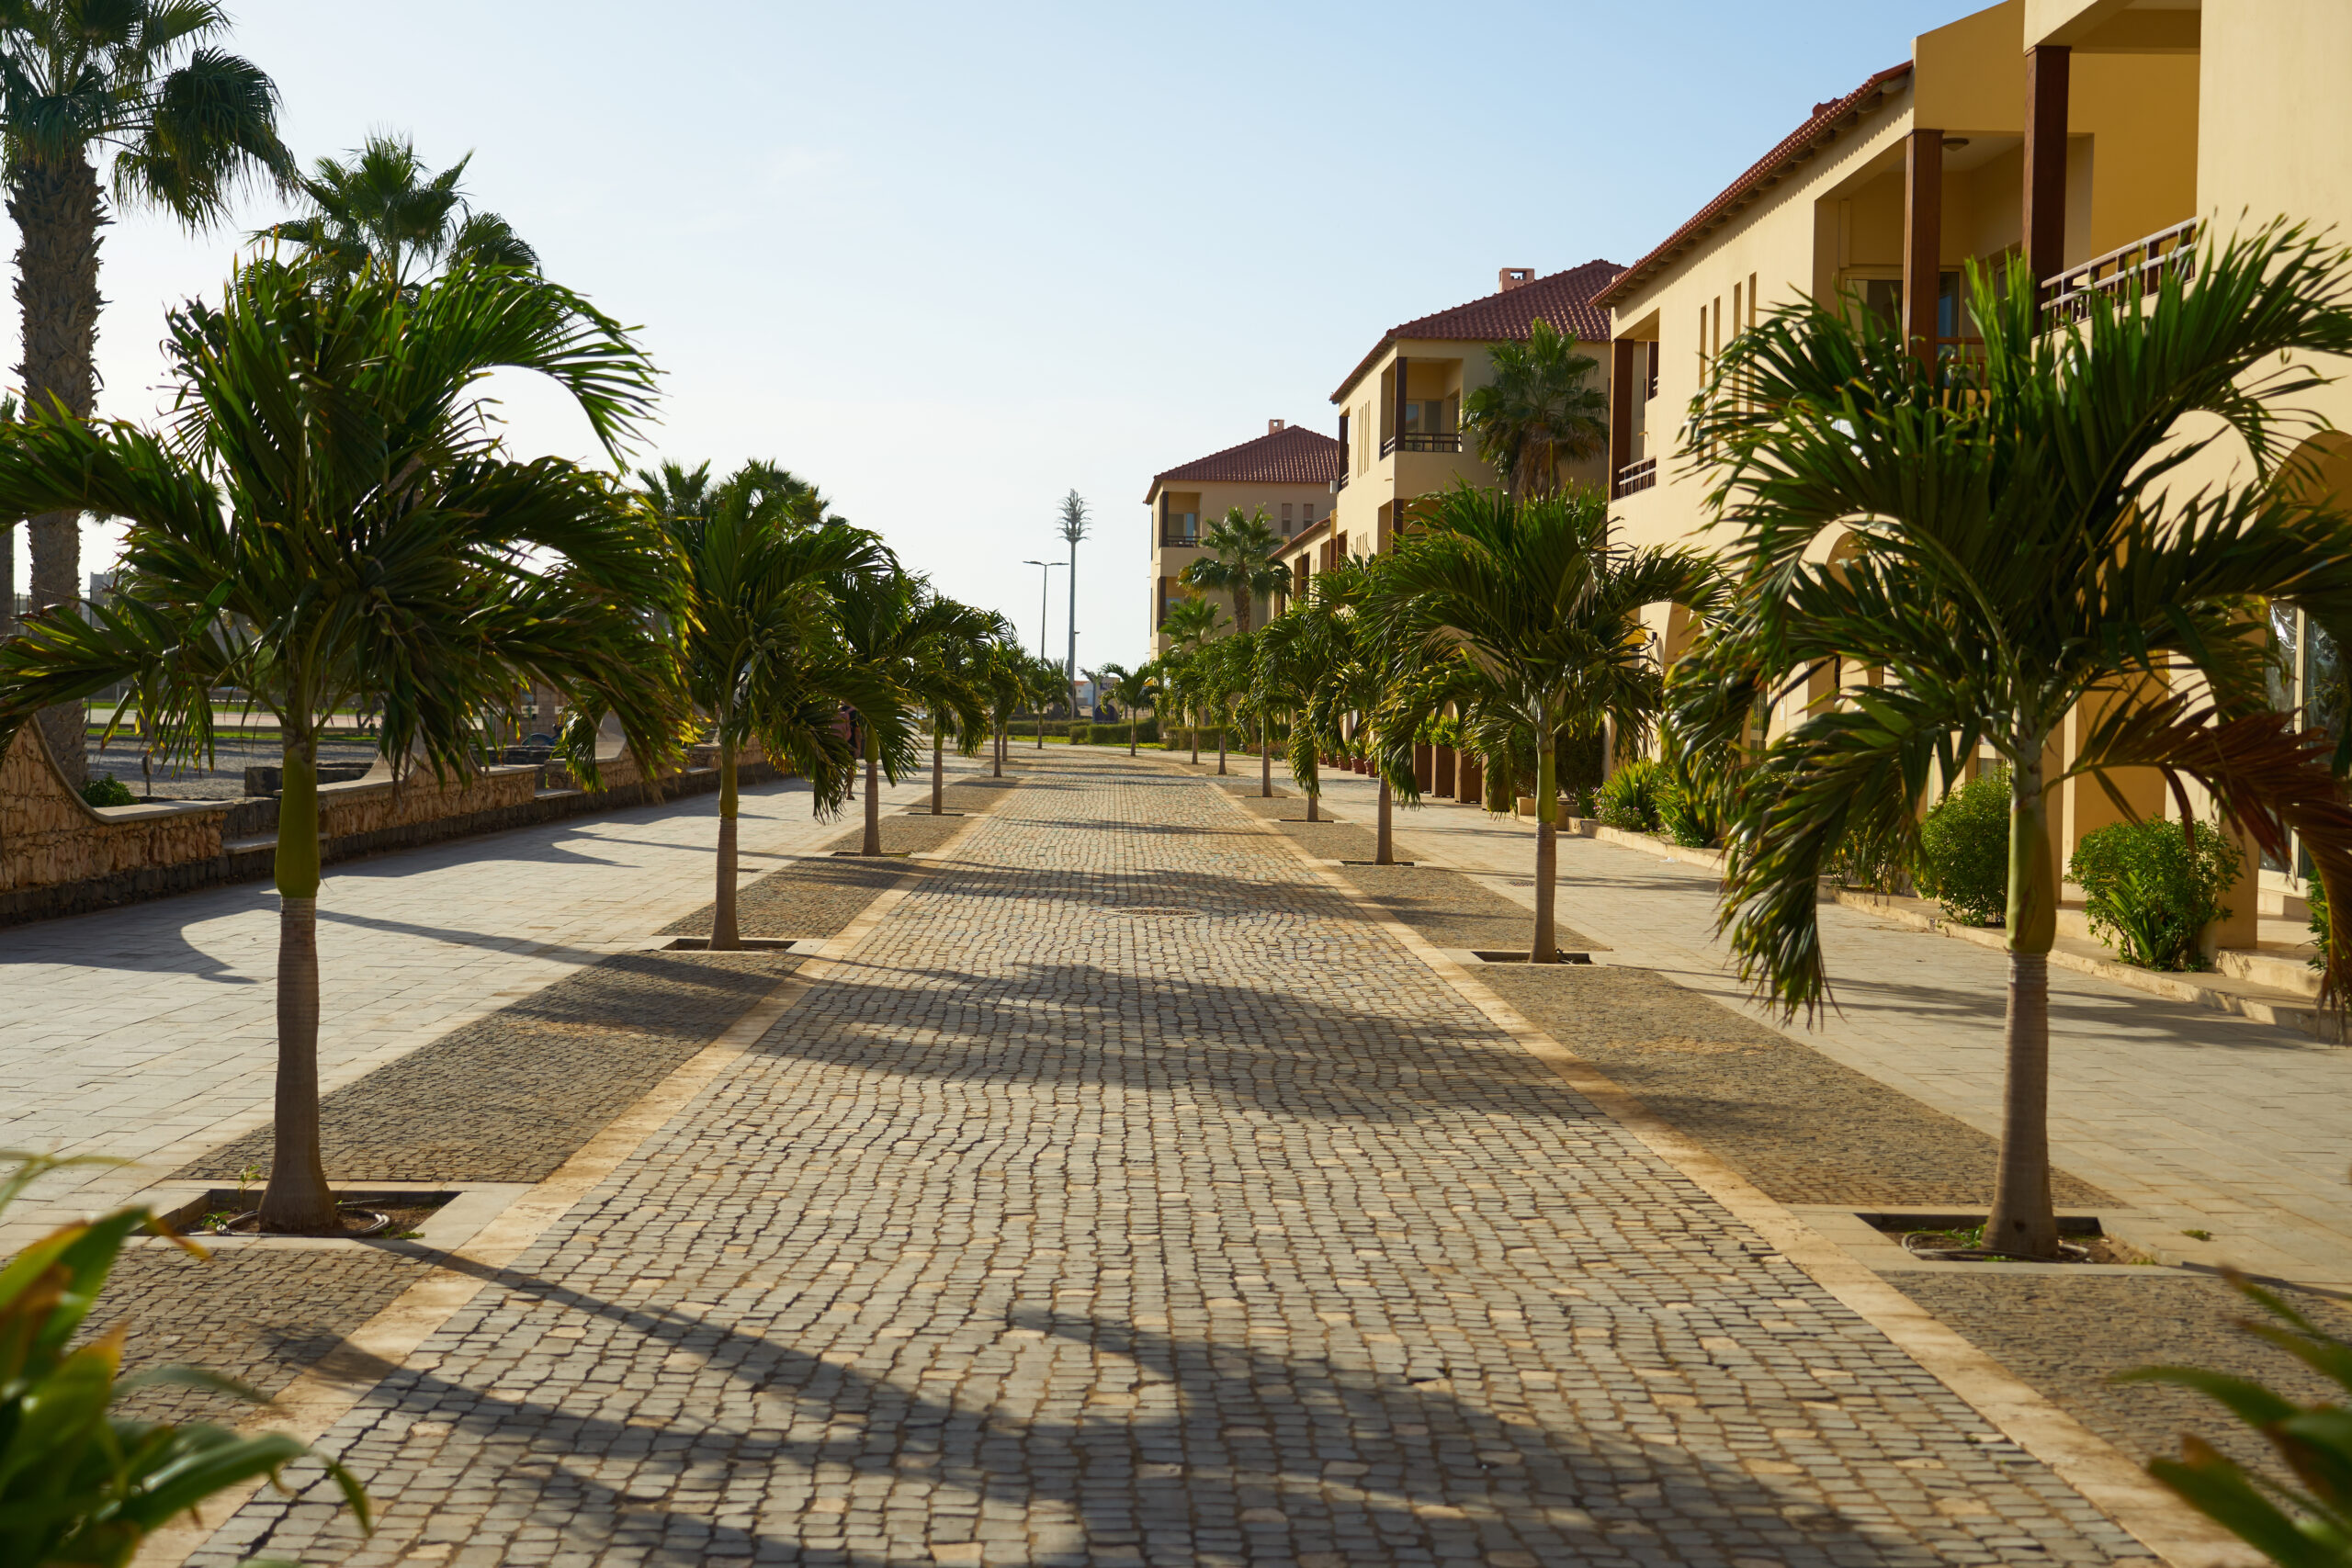 A street with palm trees in the town of Santa Maria on the island of Sal in Cape Verde.